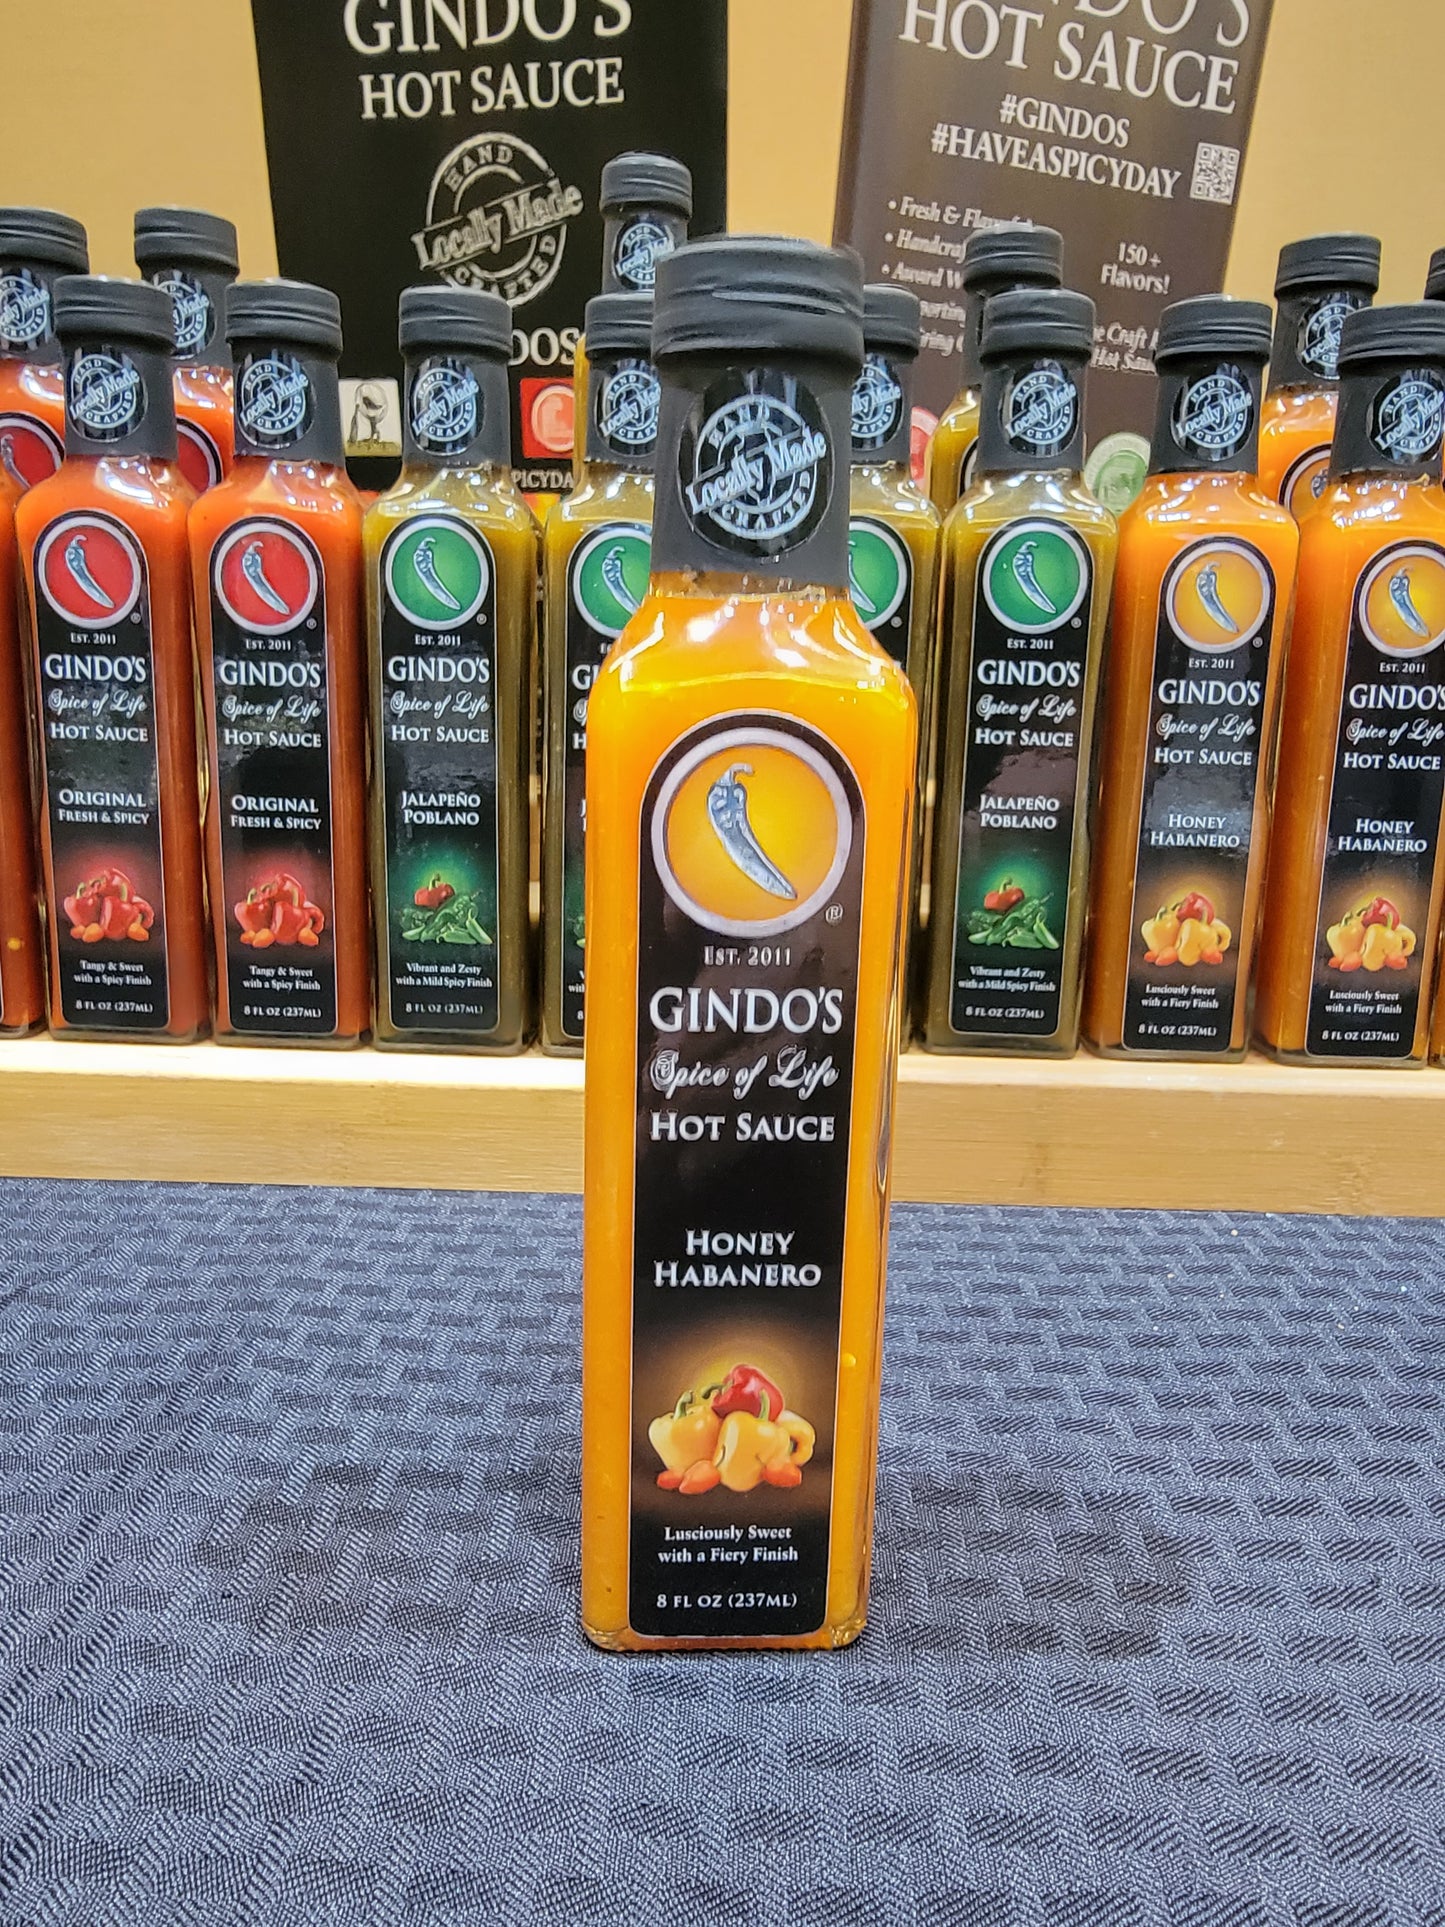 Gindos "Spice of Life" Hot Sauce